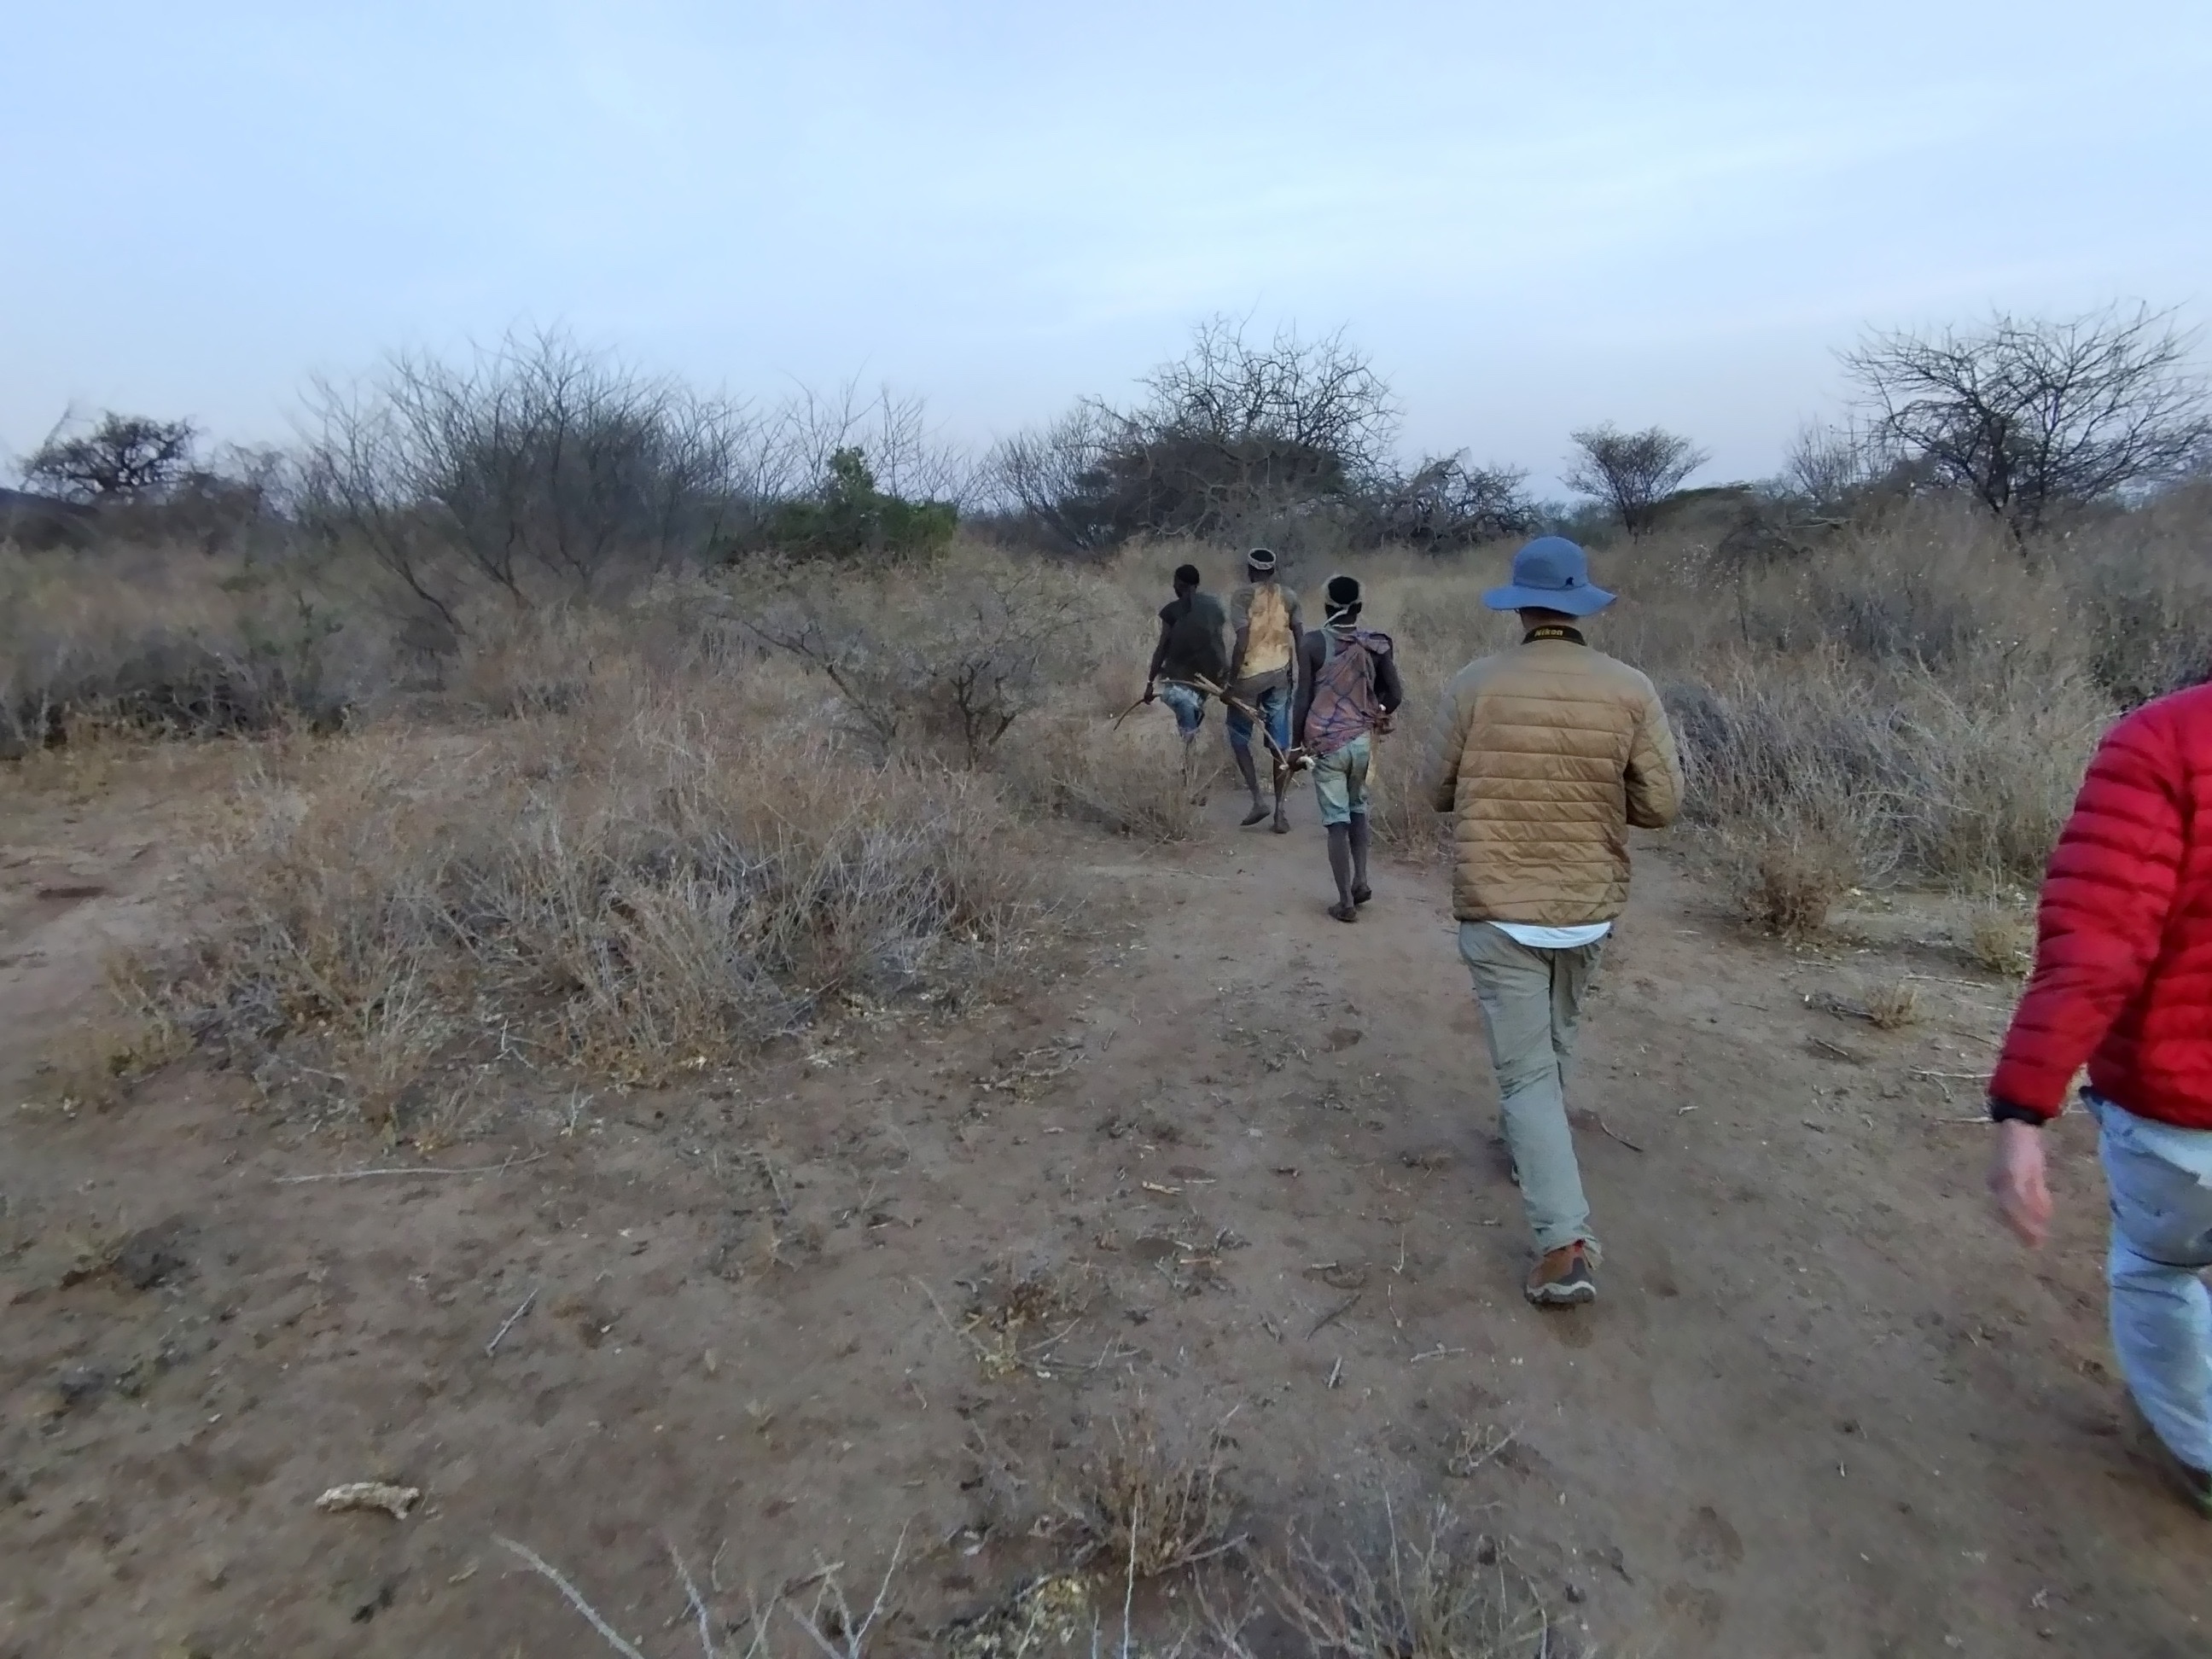 Following local people as they hunt for food in Tanzania